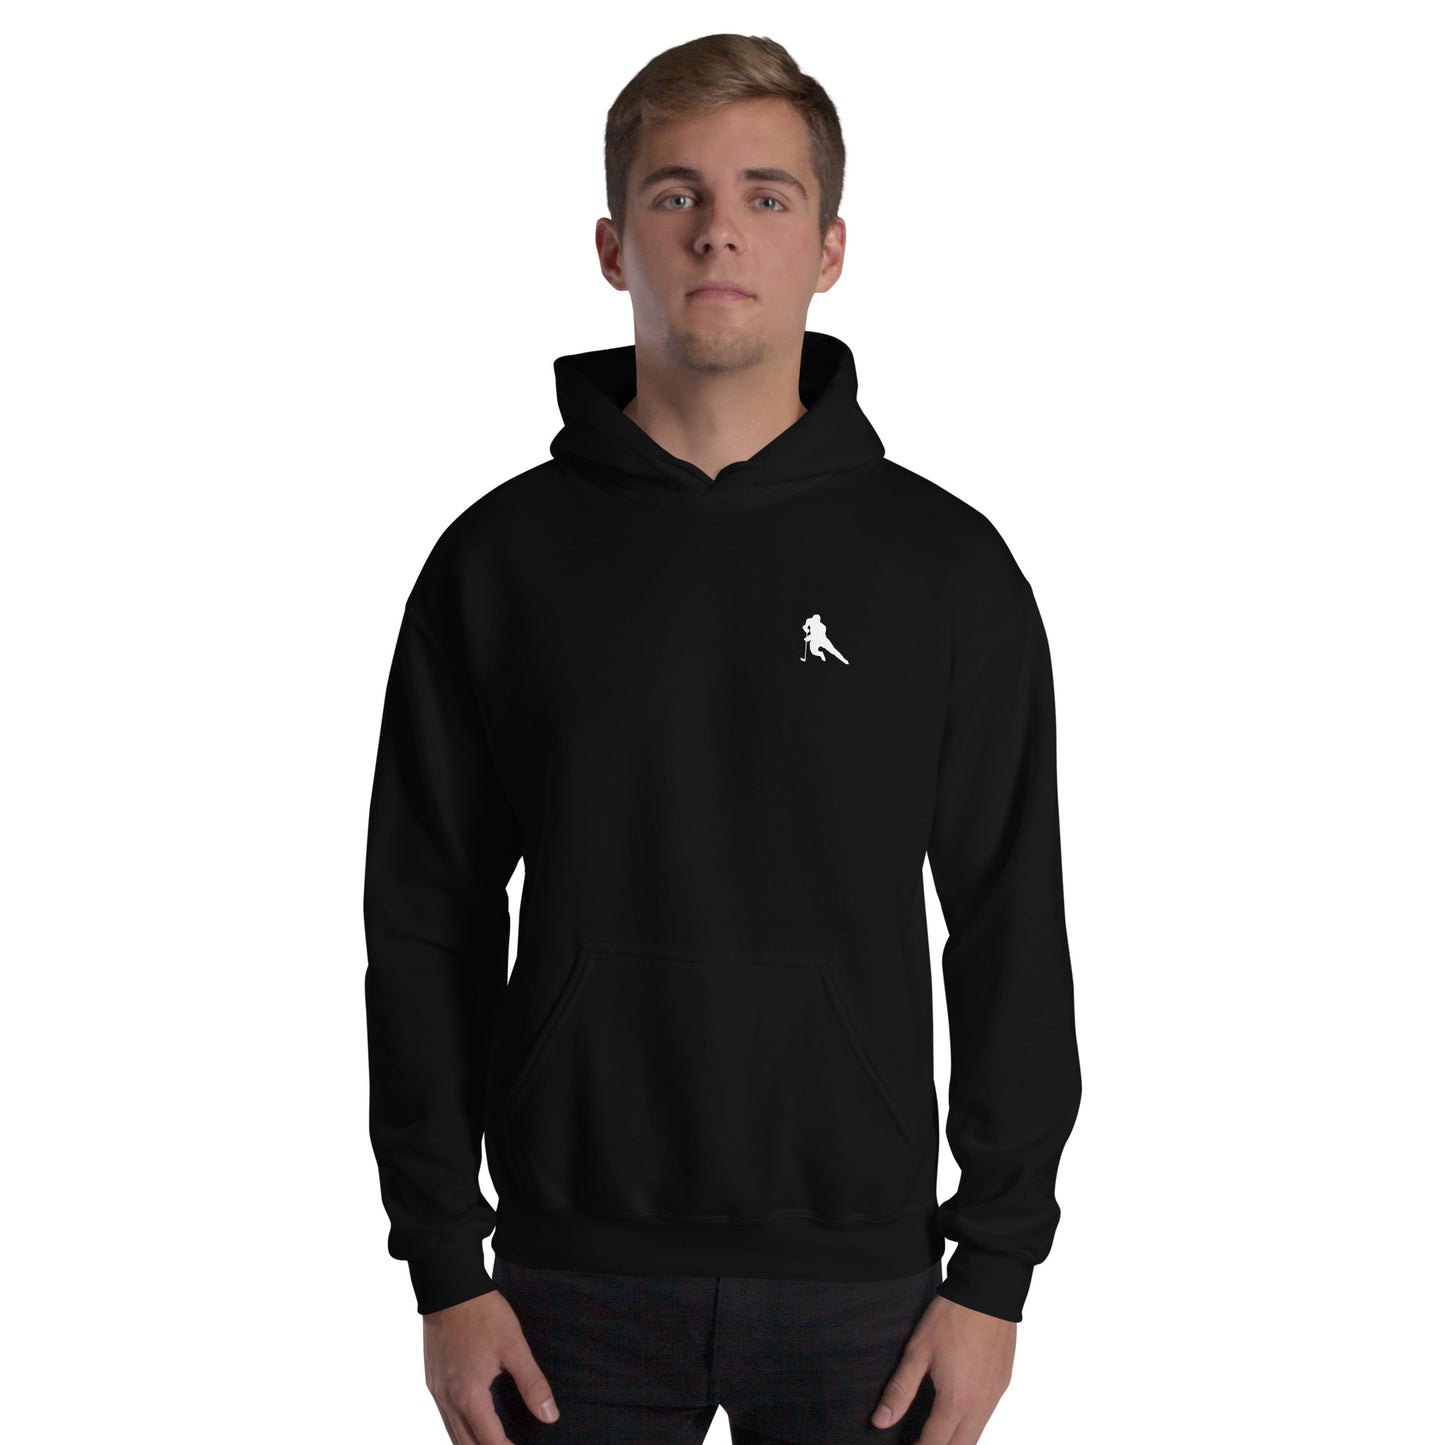 Relaxed and Fast - Unisex Hoodie